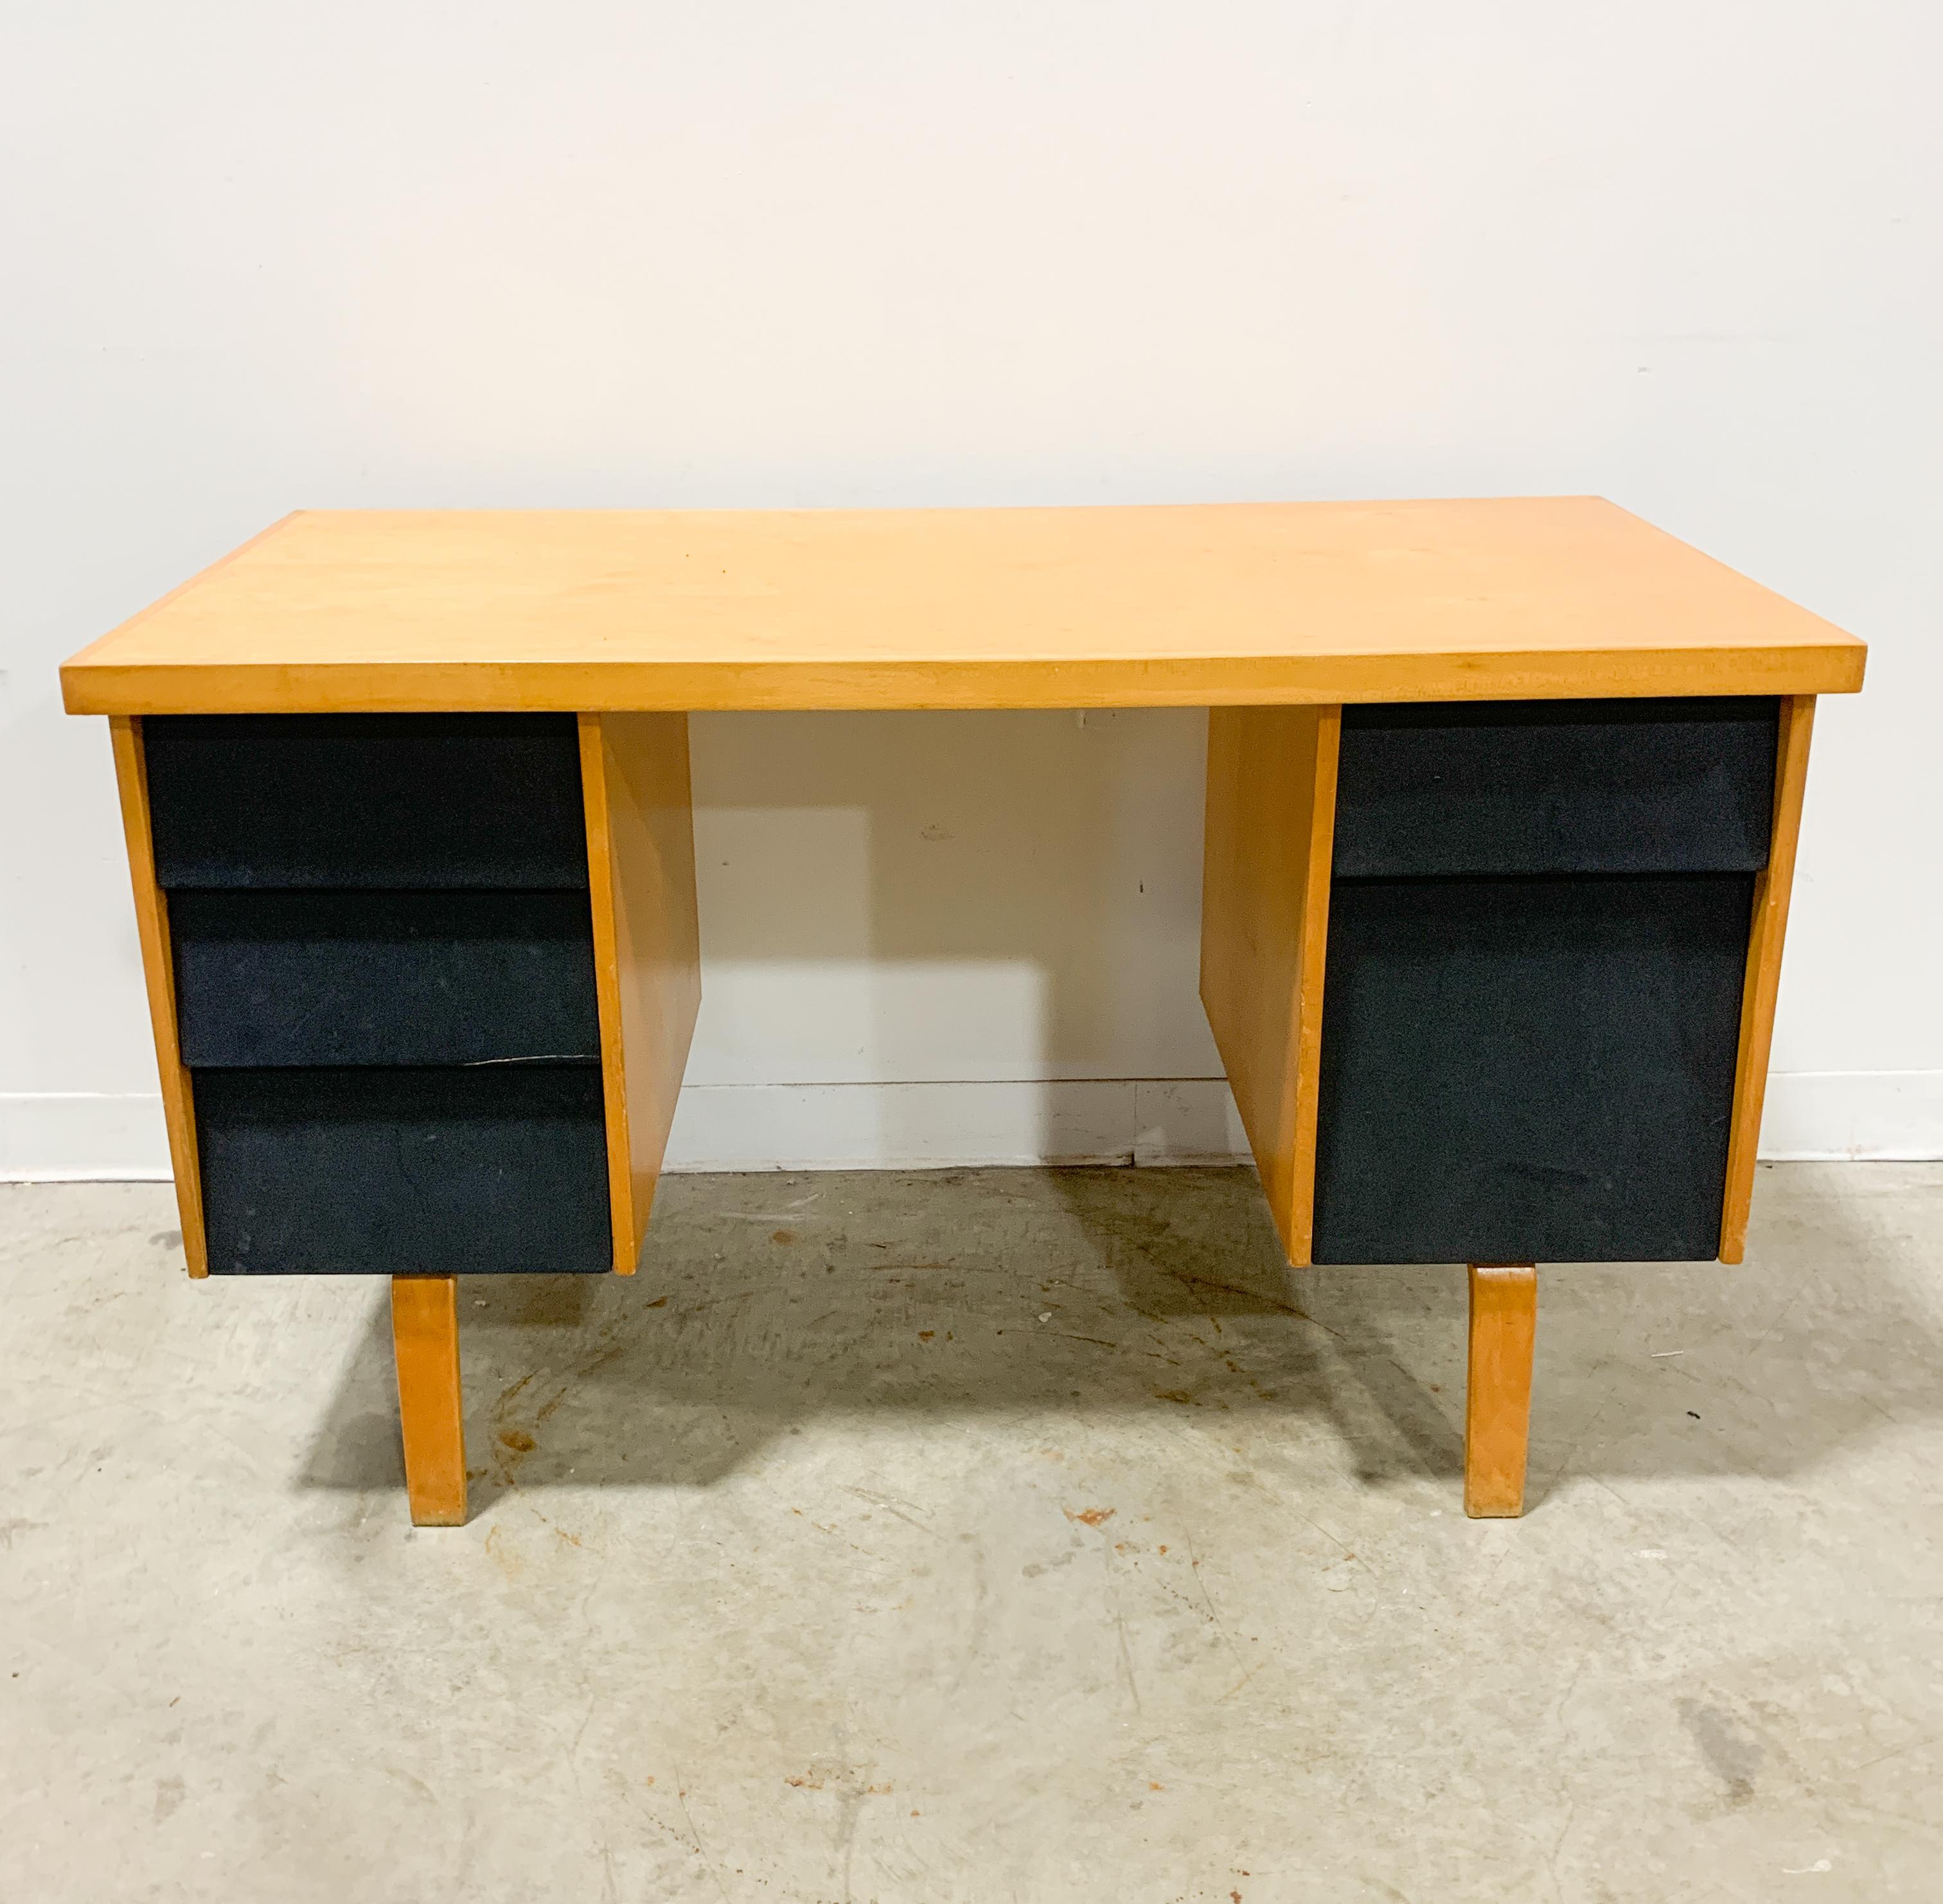 Very rare early modern desk and chair designed by Alvar and Aino Aalto for their Artek-Pascoe line that launched in the USA in the 1940s. Classic bentwood and birch plywood combined with angled drawer fronts. Three drawers left pedestal and 2teo on